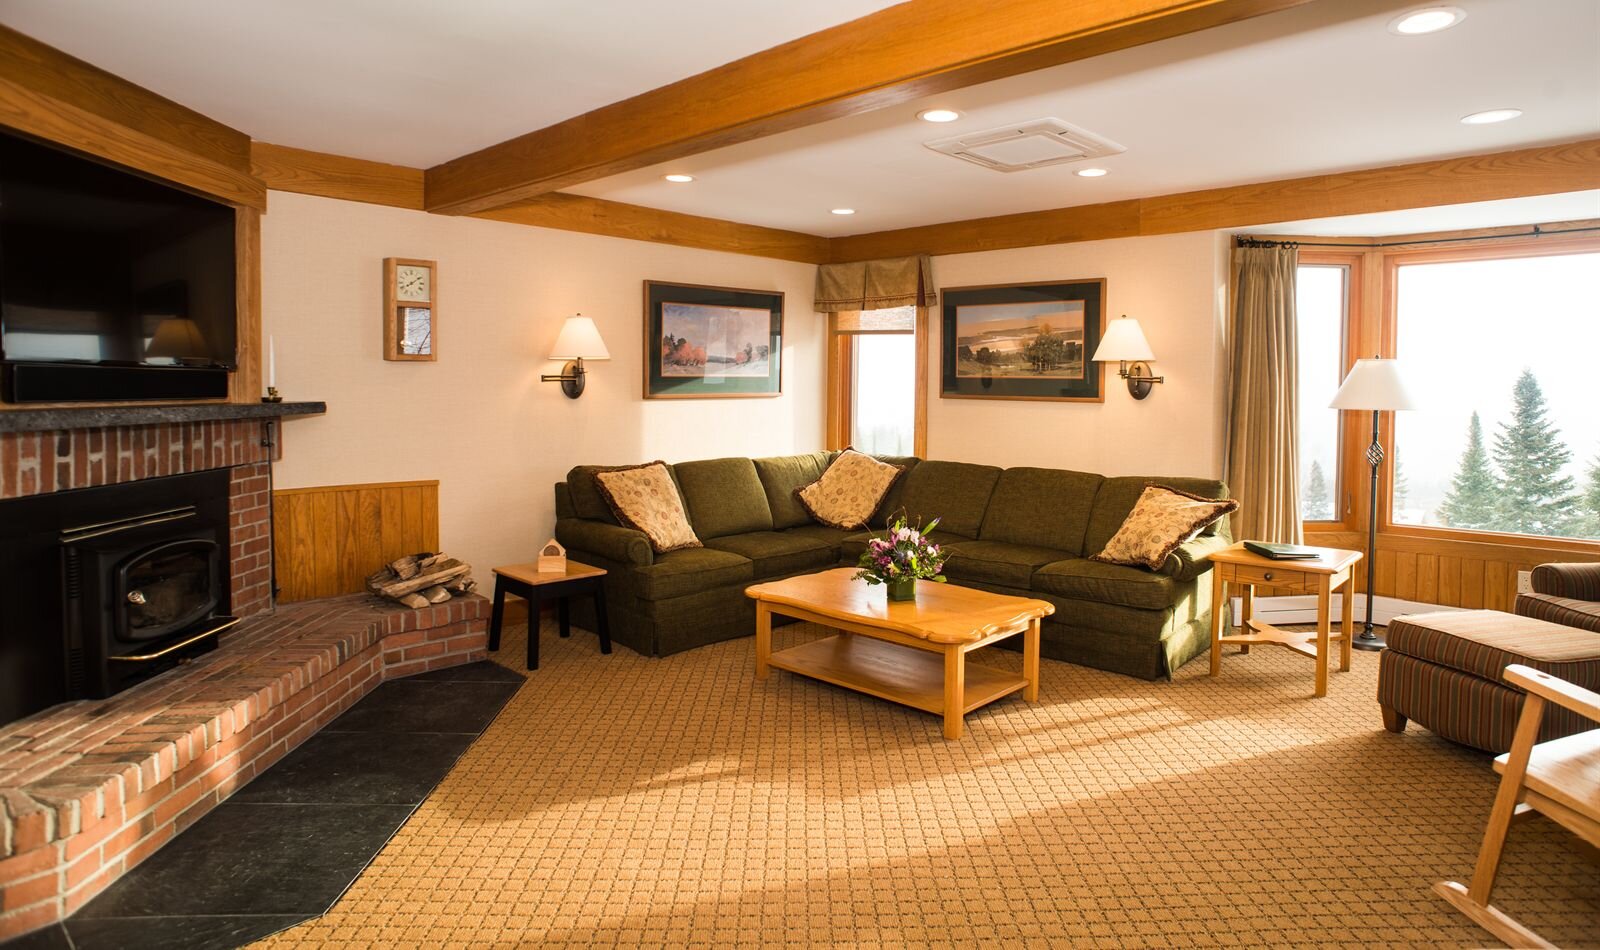 Guest House Rental Agreement Trapp Family Lodge